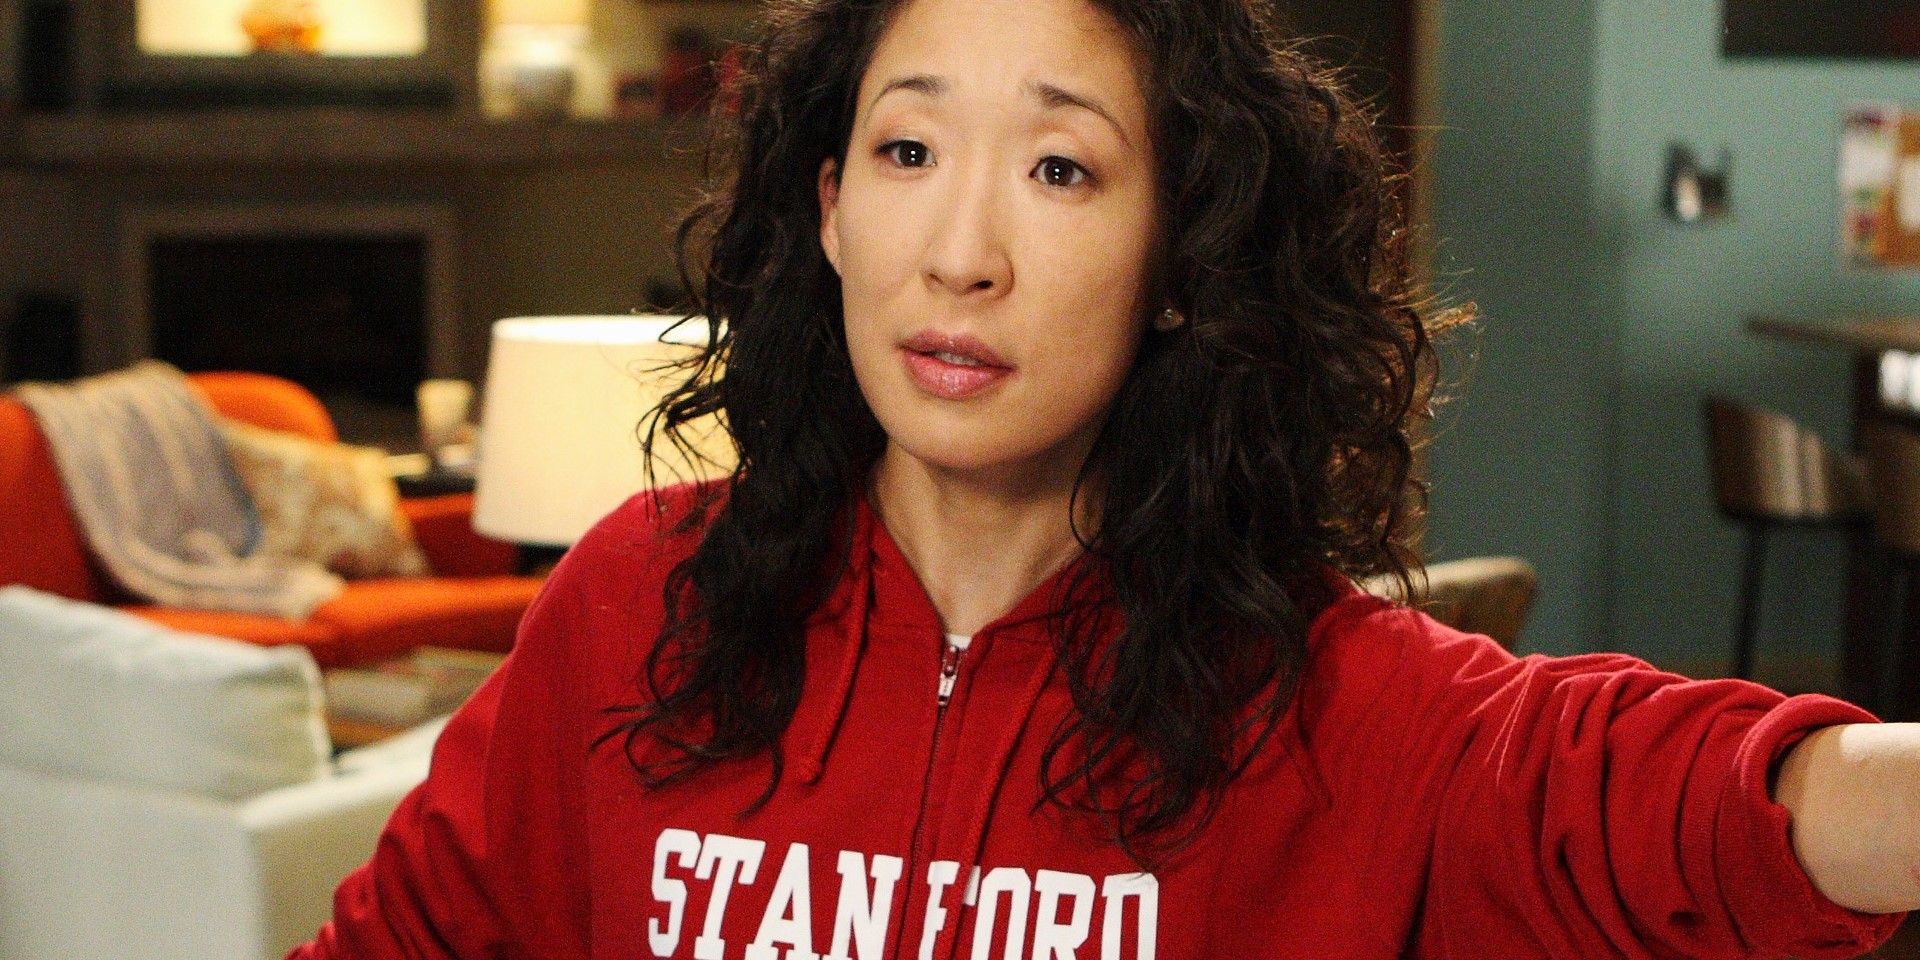 Cristina Yang in her Stanford sweatshirt with her hair down in her apartment in Grey's Anatomy